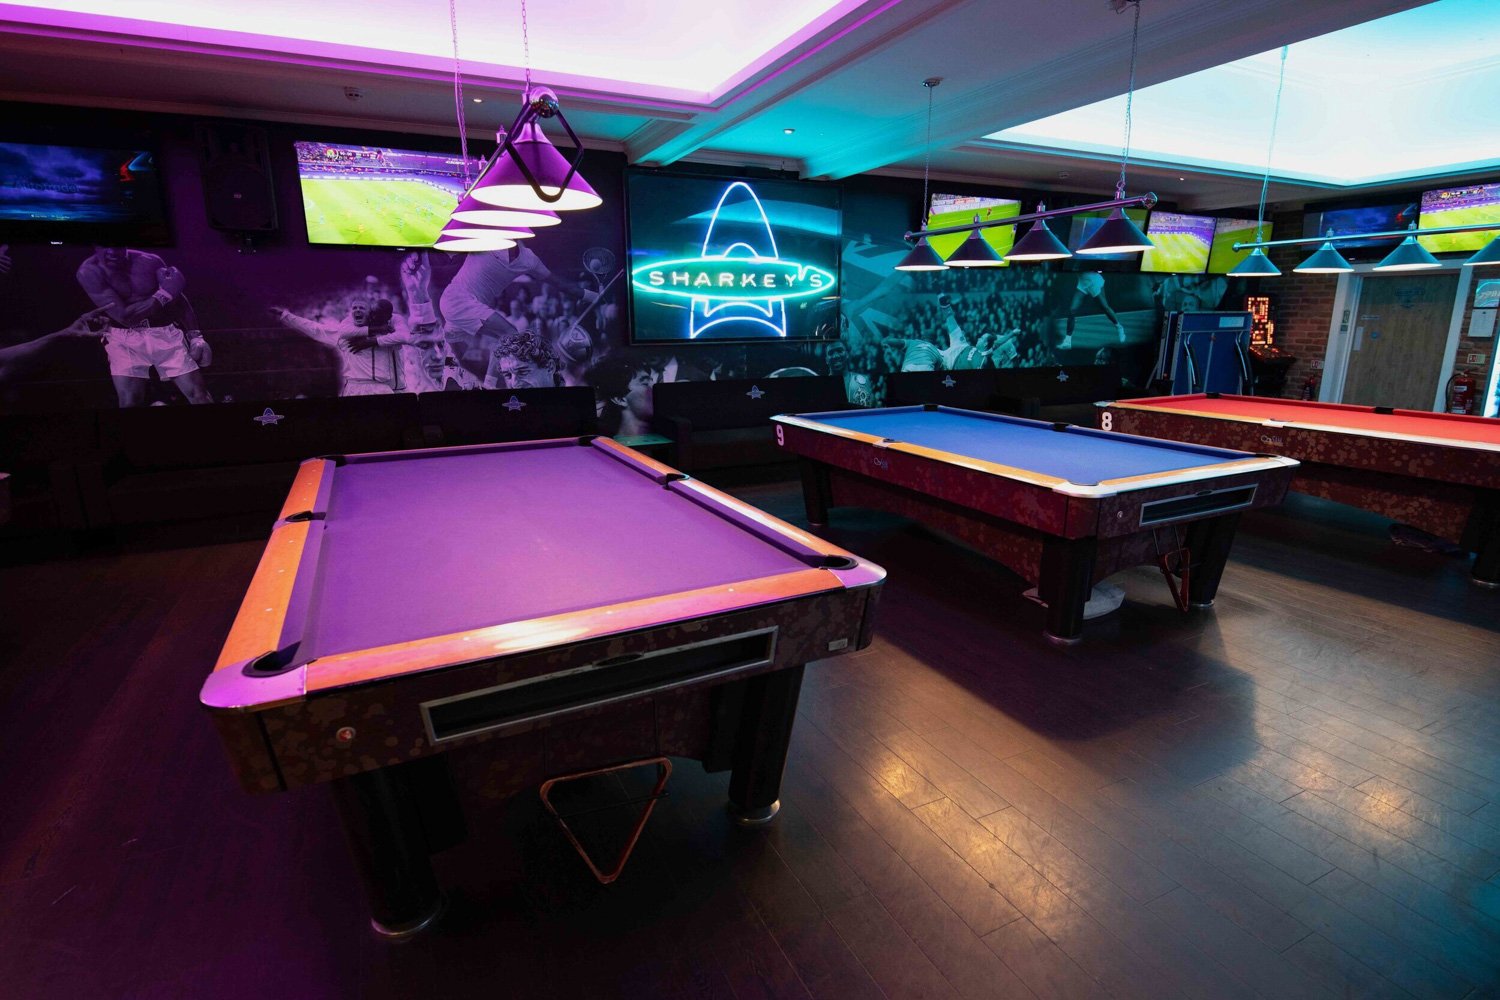 Sharkeys_Sports_Bar_Bournemouth_Live_Sports_Poole_Snooker_Table_Tennis_VIP_Rooms_Consoles-23.jpg